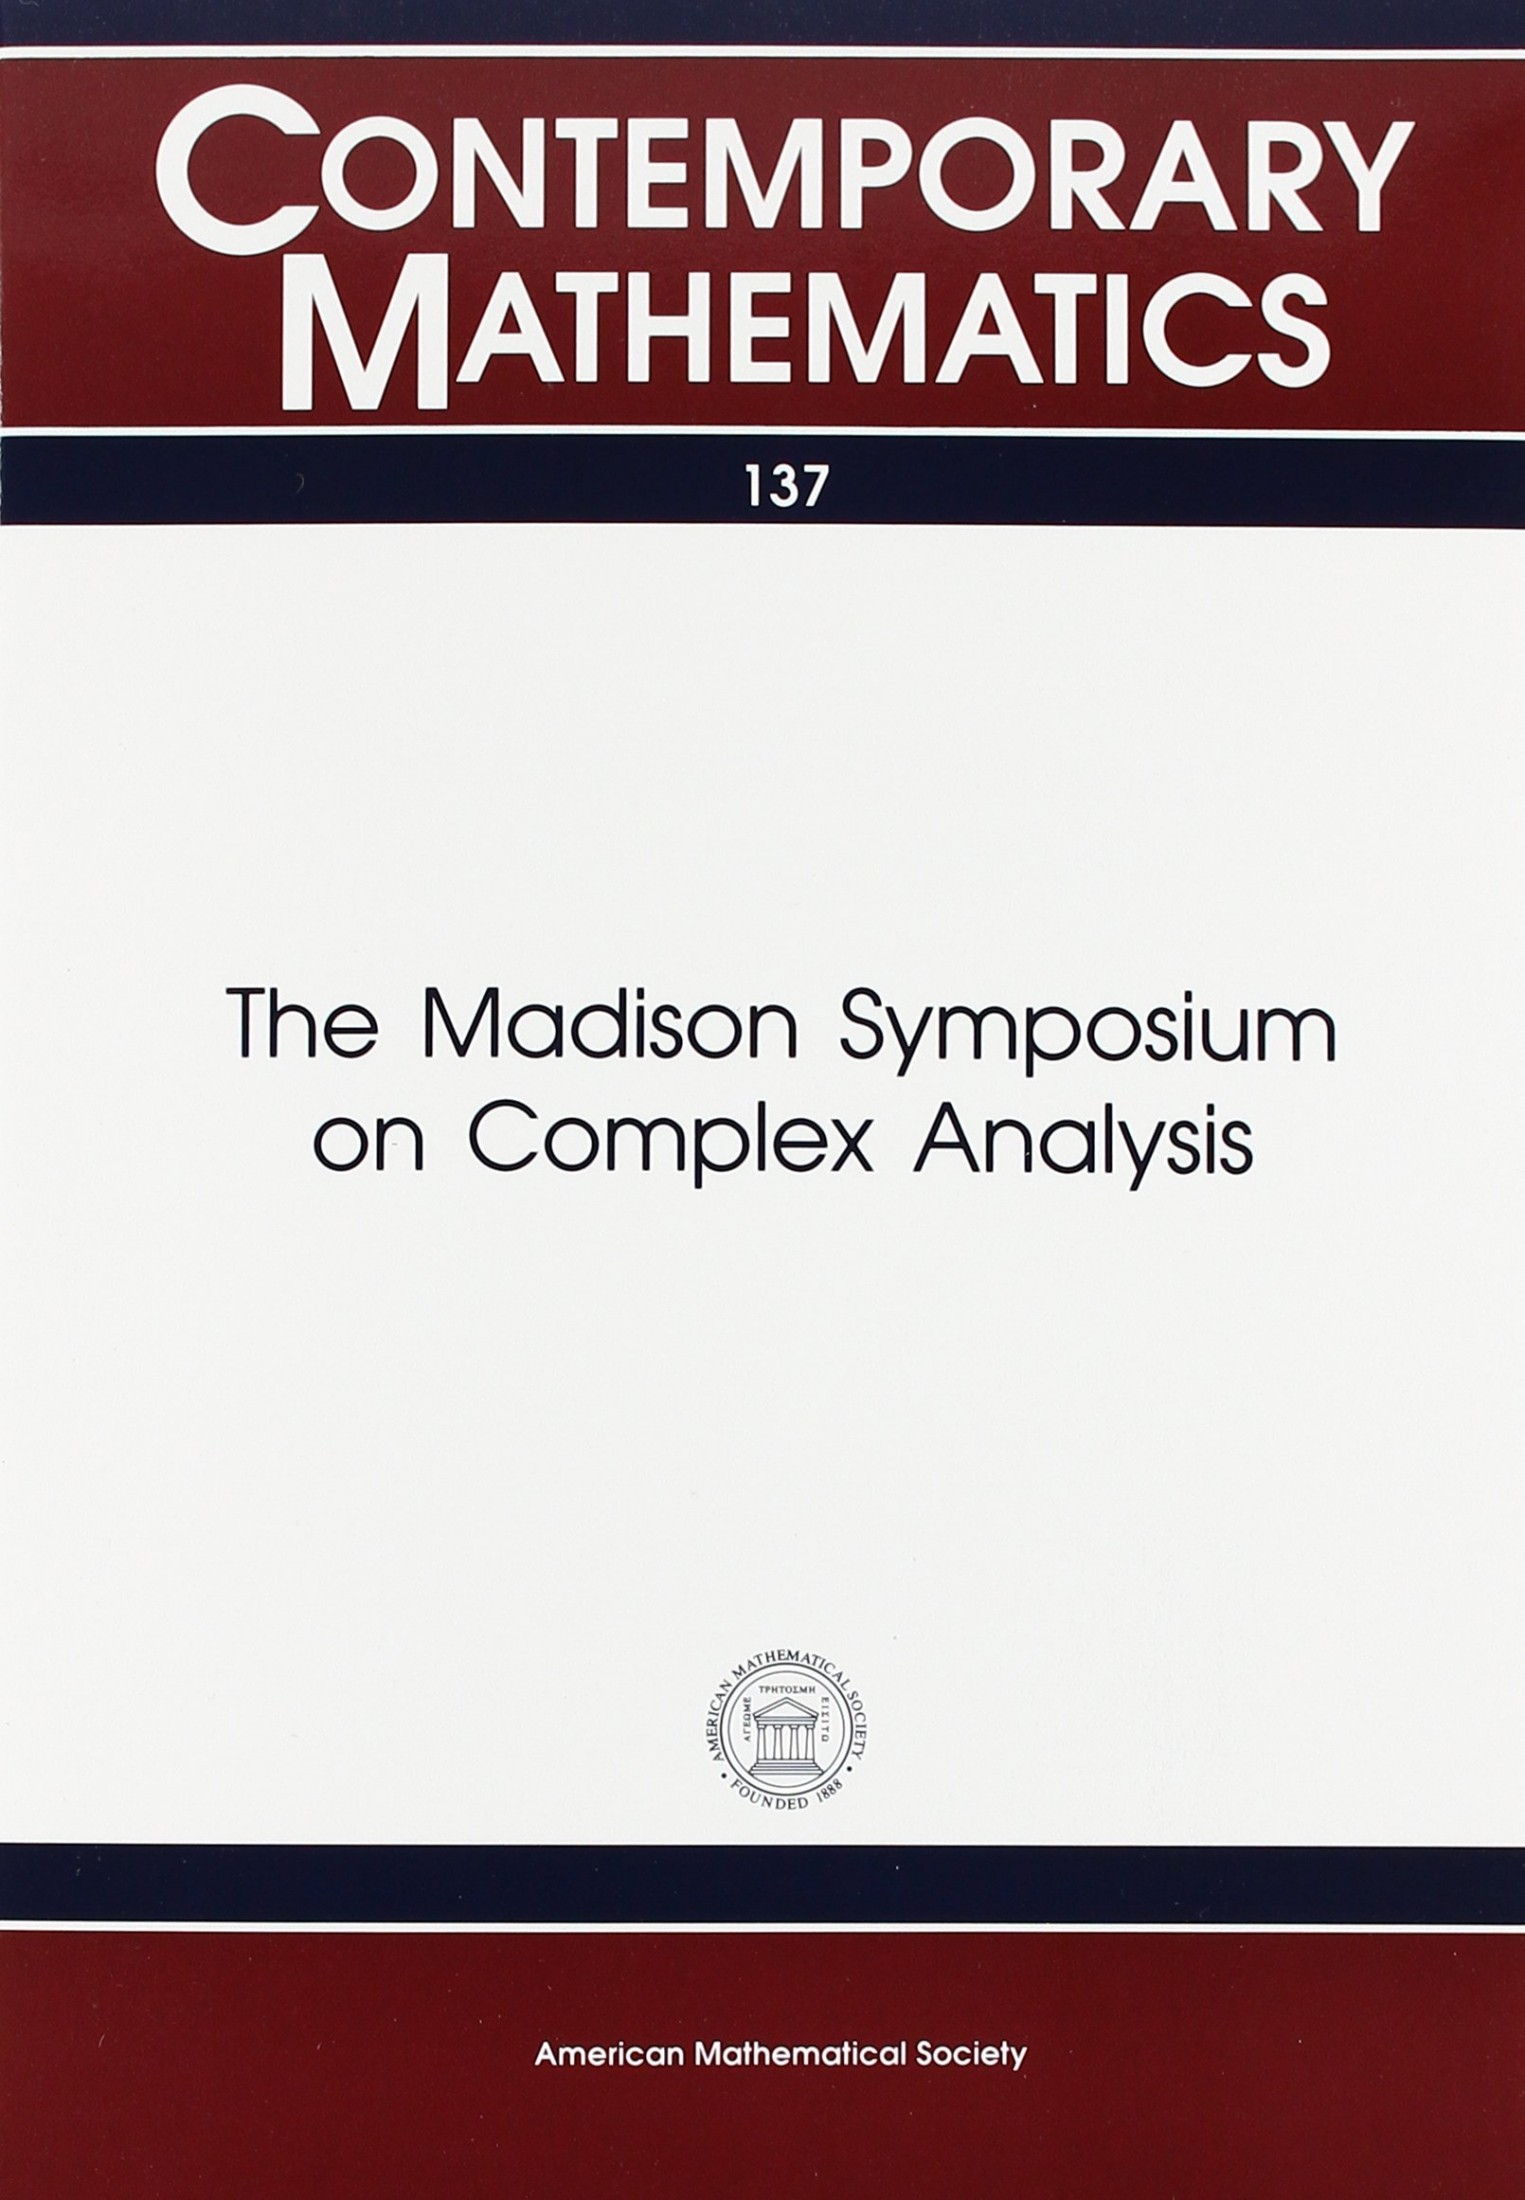 The Madison Symposium on Complex Analysis: Proceedings of the Symposium on Complex Analysis Held June 2-7, 1991 at the University of Wisconsin-Madison